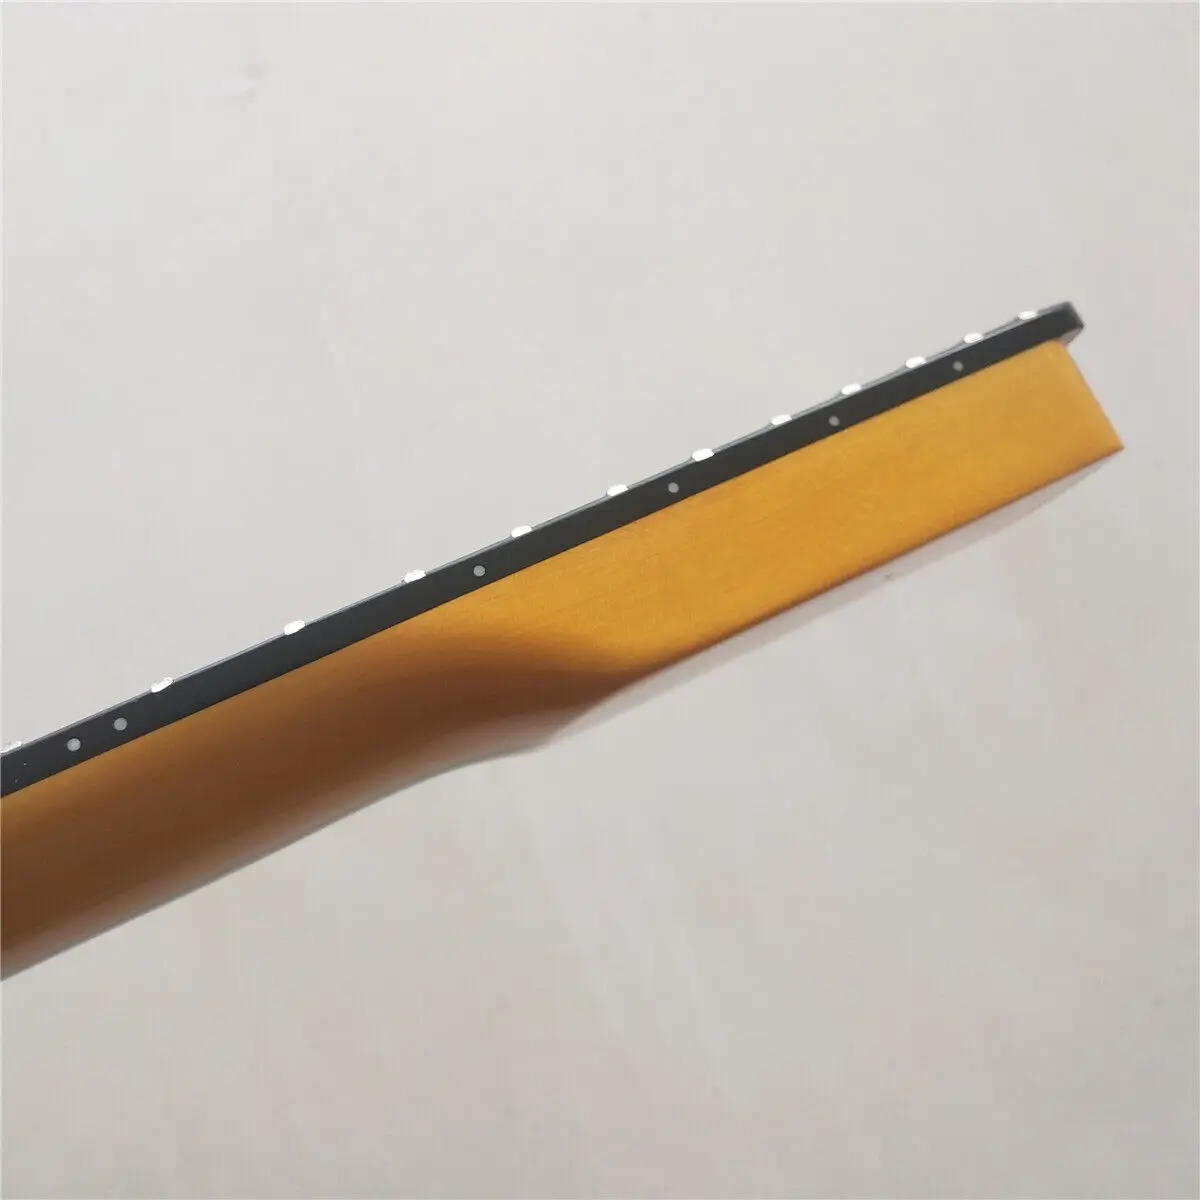 Big head Electric Guitar Neck for ST style 22 Fret Maple fingerboard Block inlay New Replacement enlarge